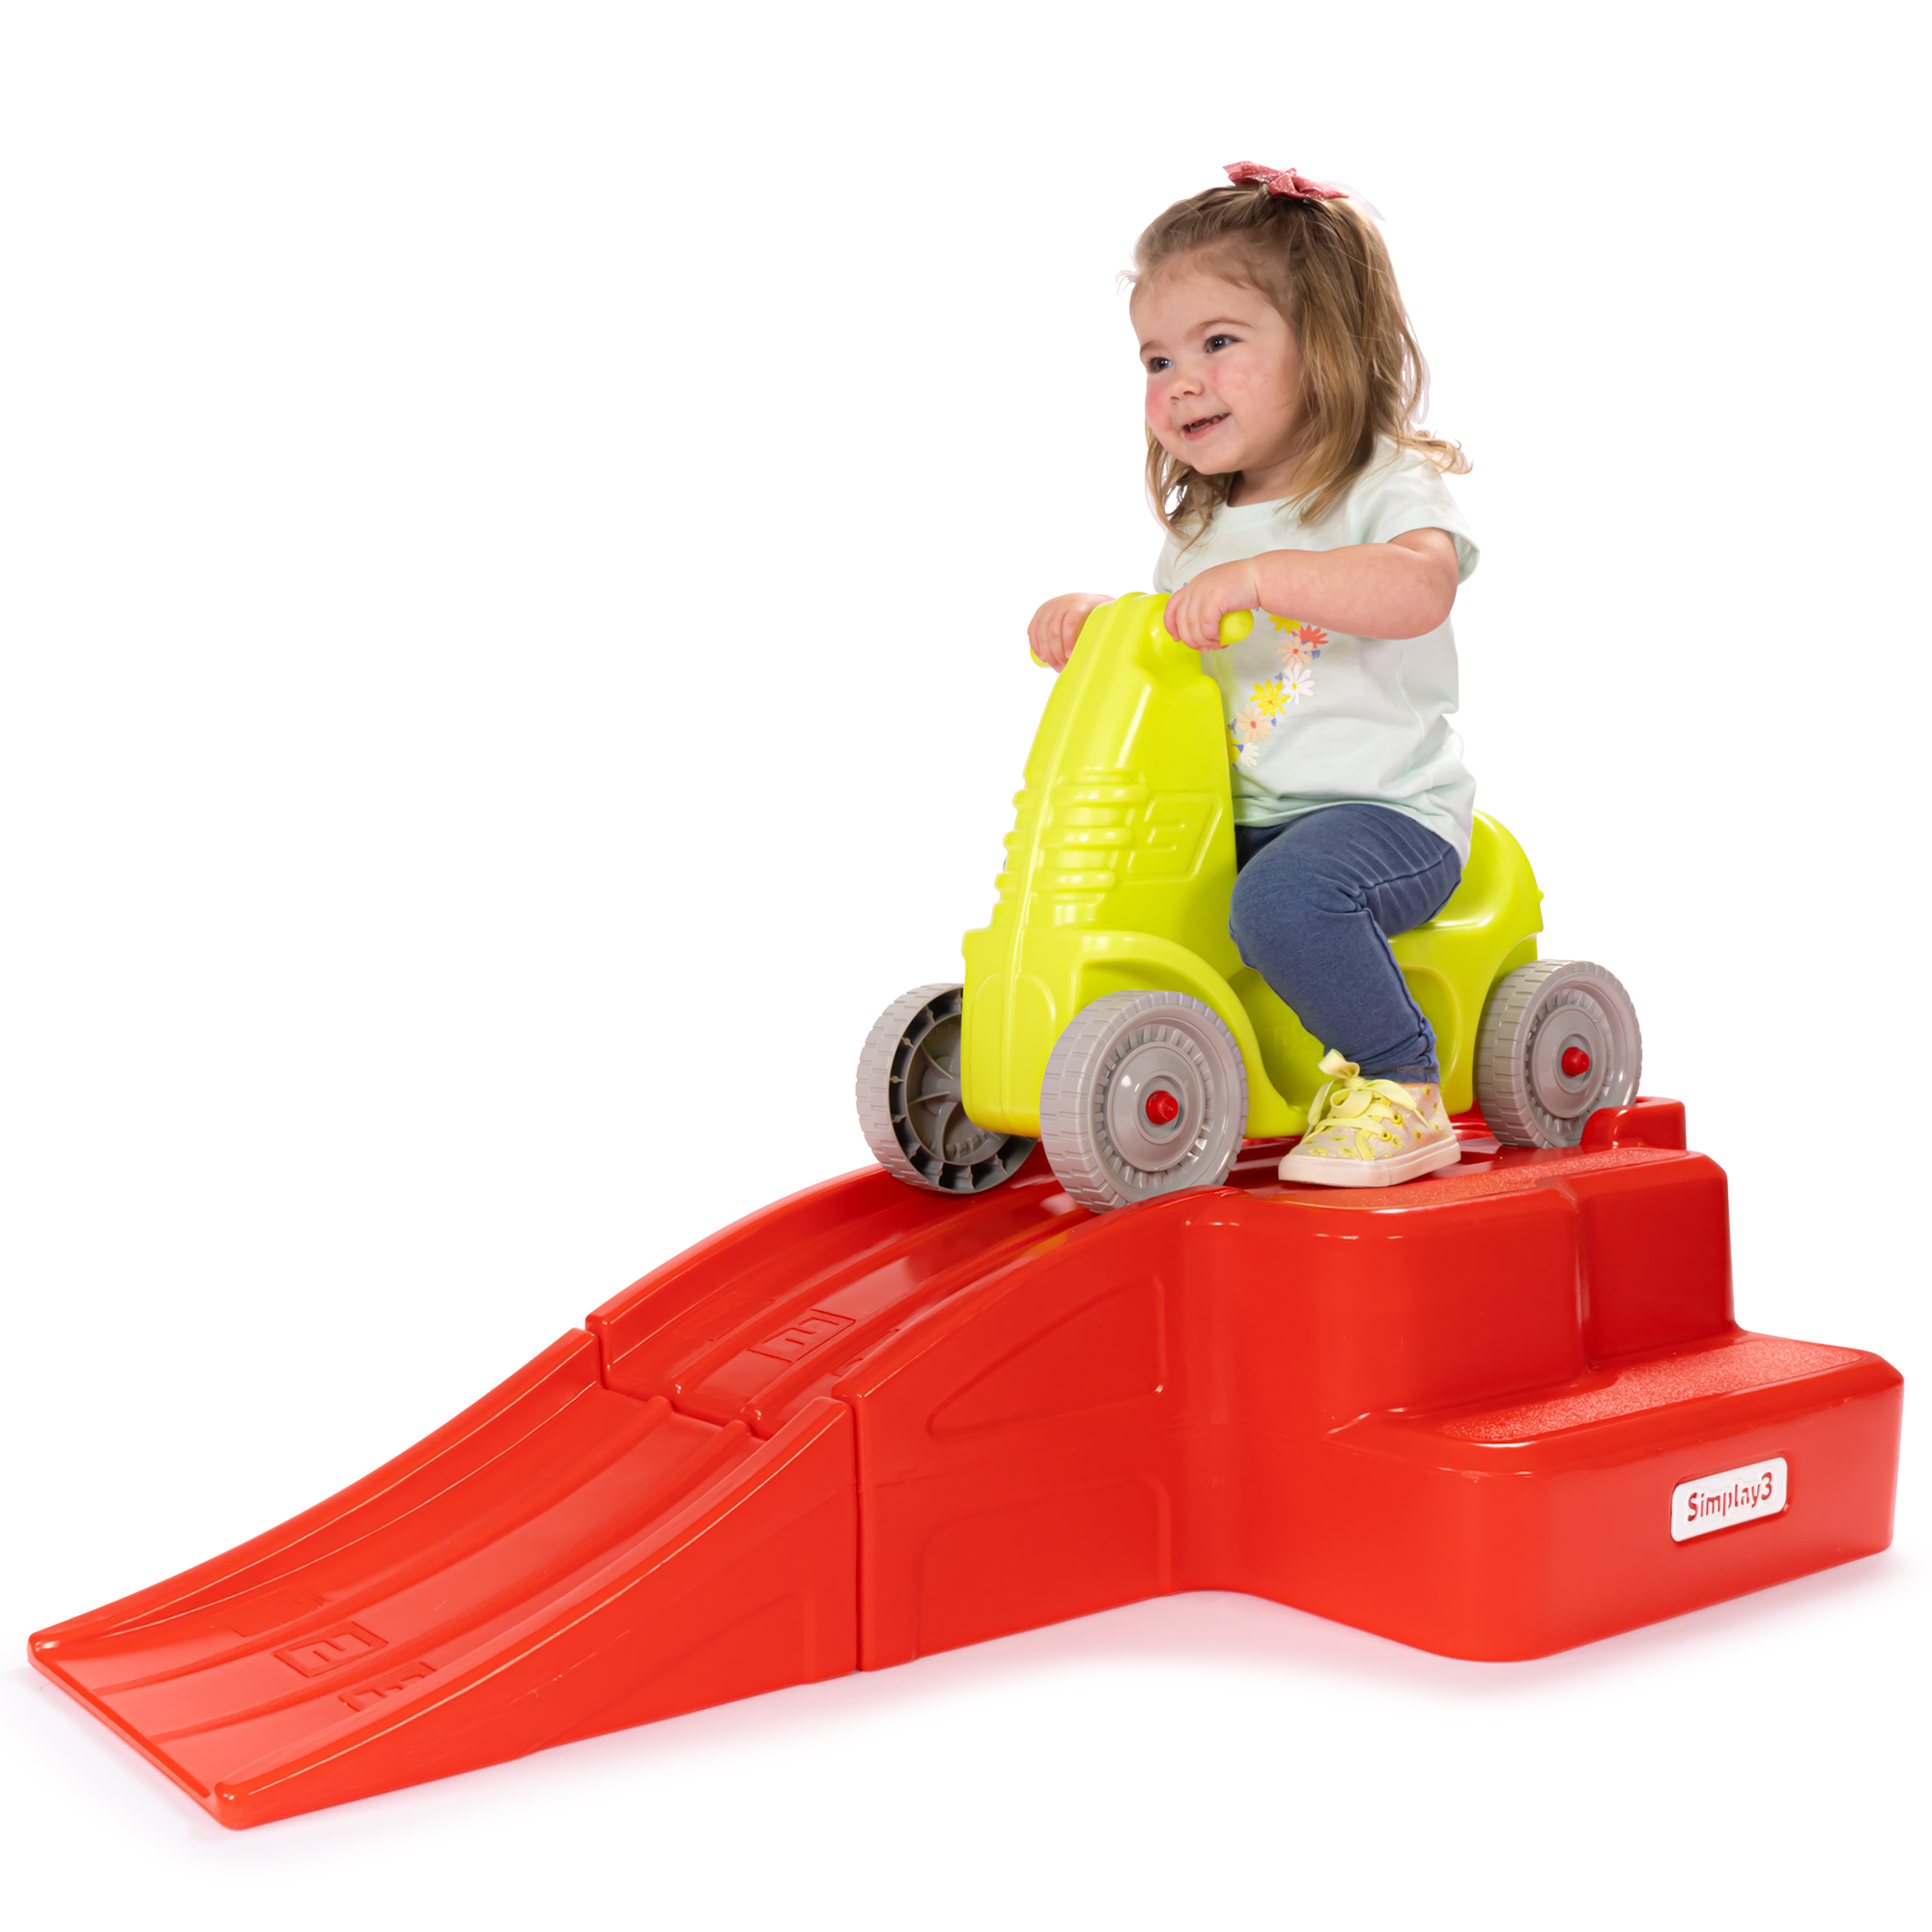 Downhill Thrill Kids Roller Coaster toy by simplay3